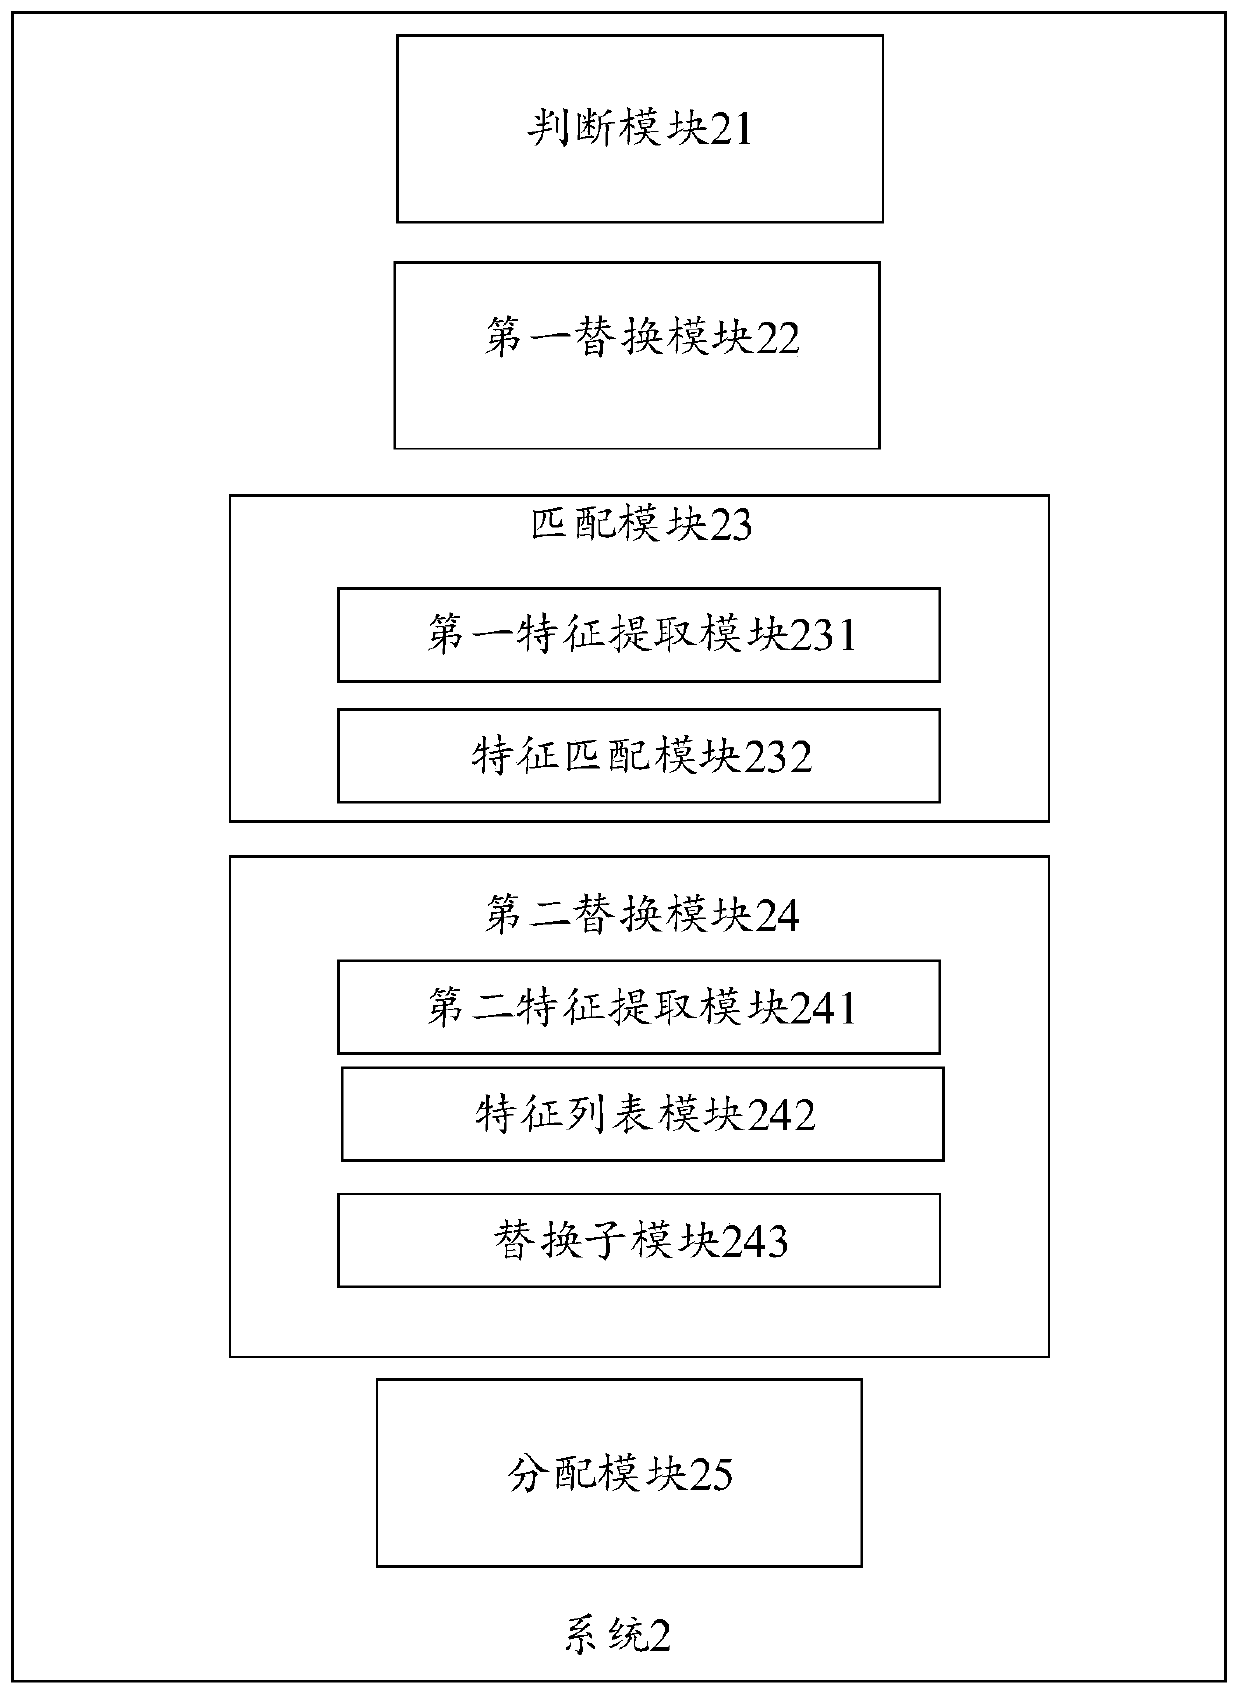 Real-time recommendation method and system based on user browsing behaviors